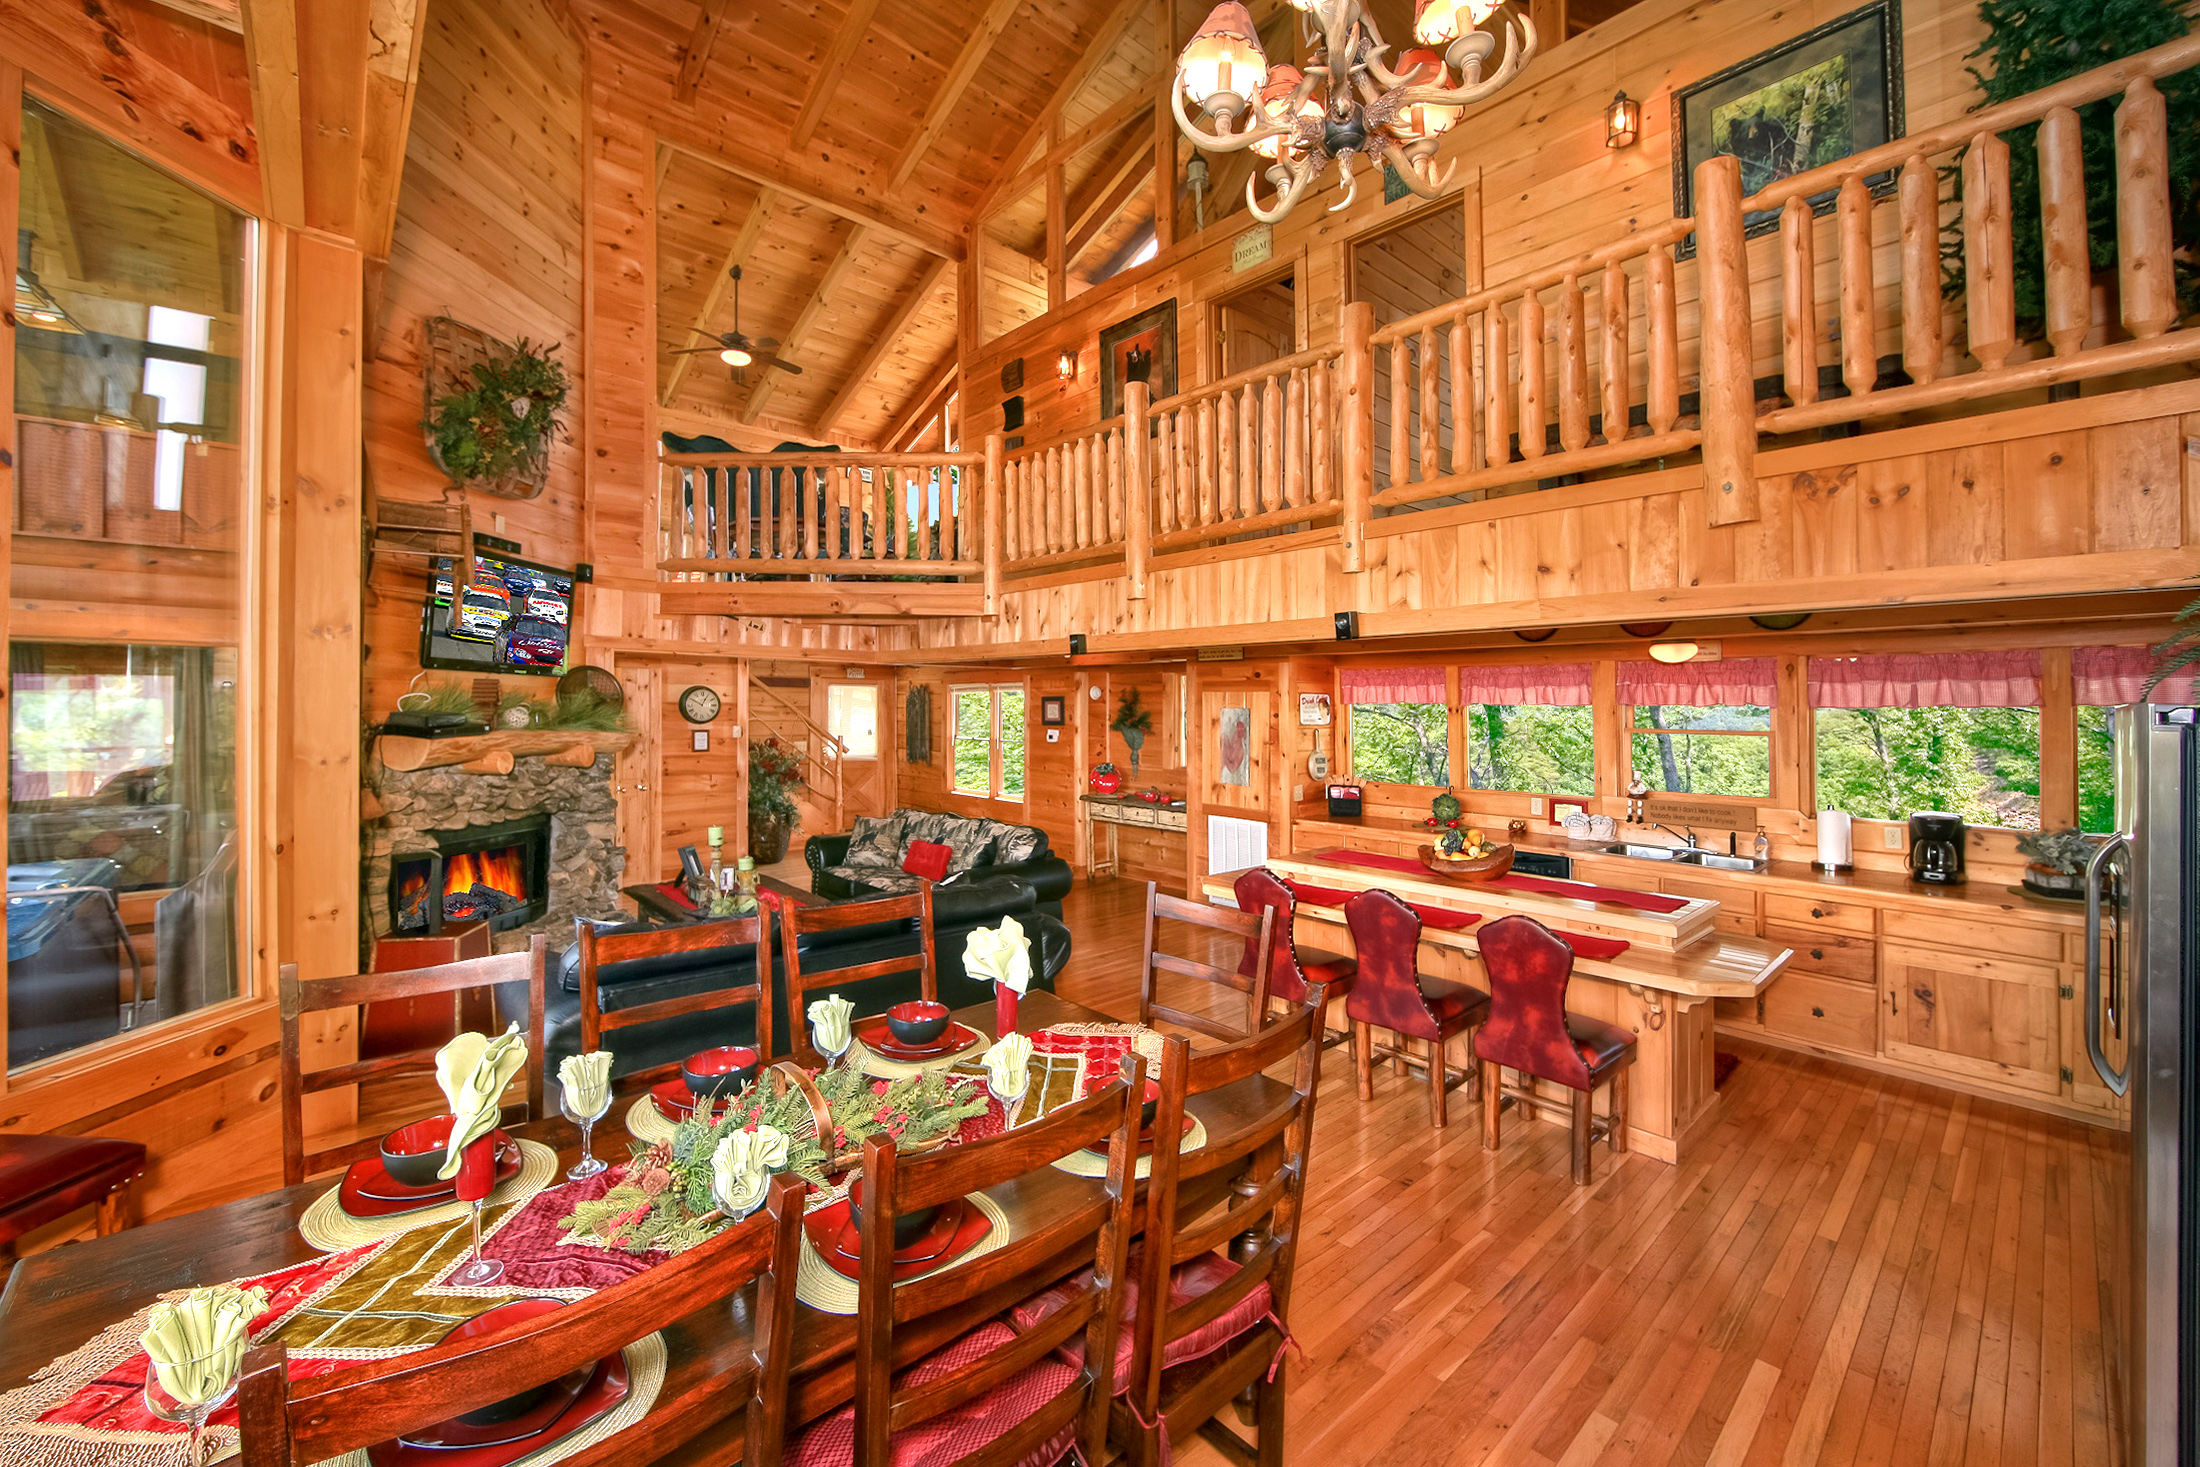 American Mountain Rentals' cabin inventory features full kitchens and spacious living rooms for a comfortable vacation stay.